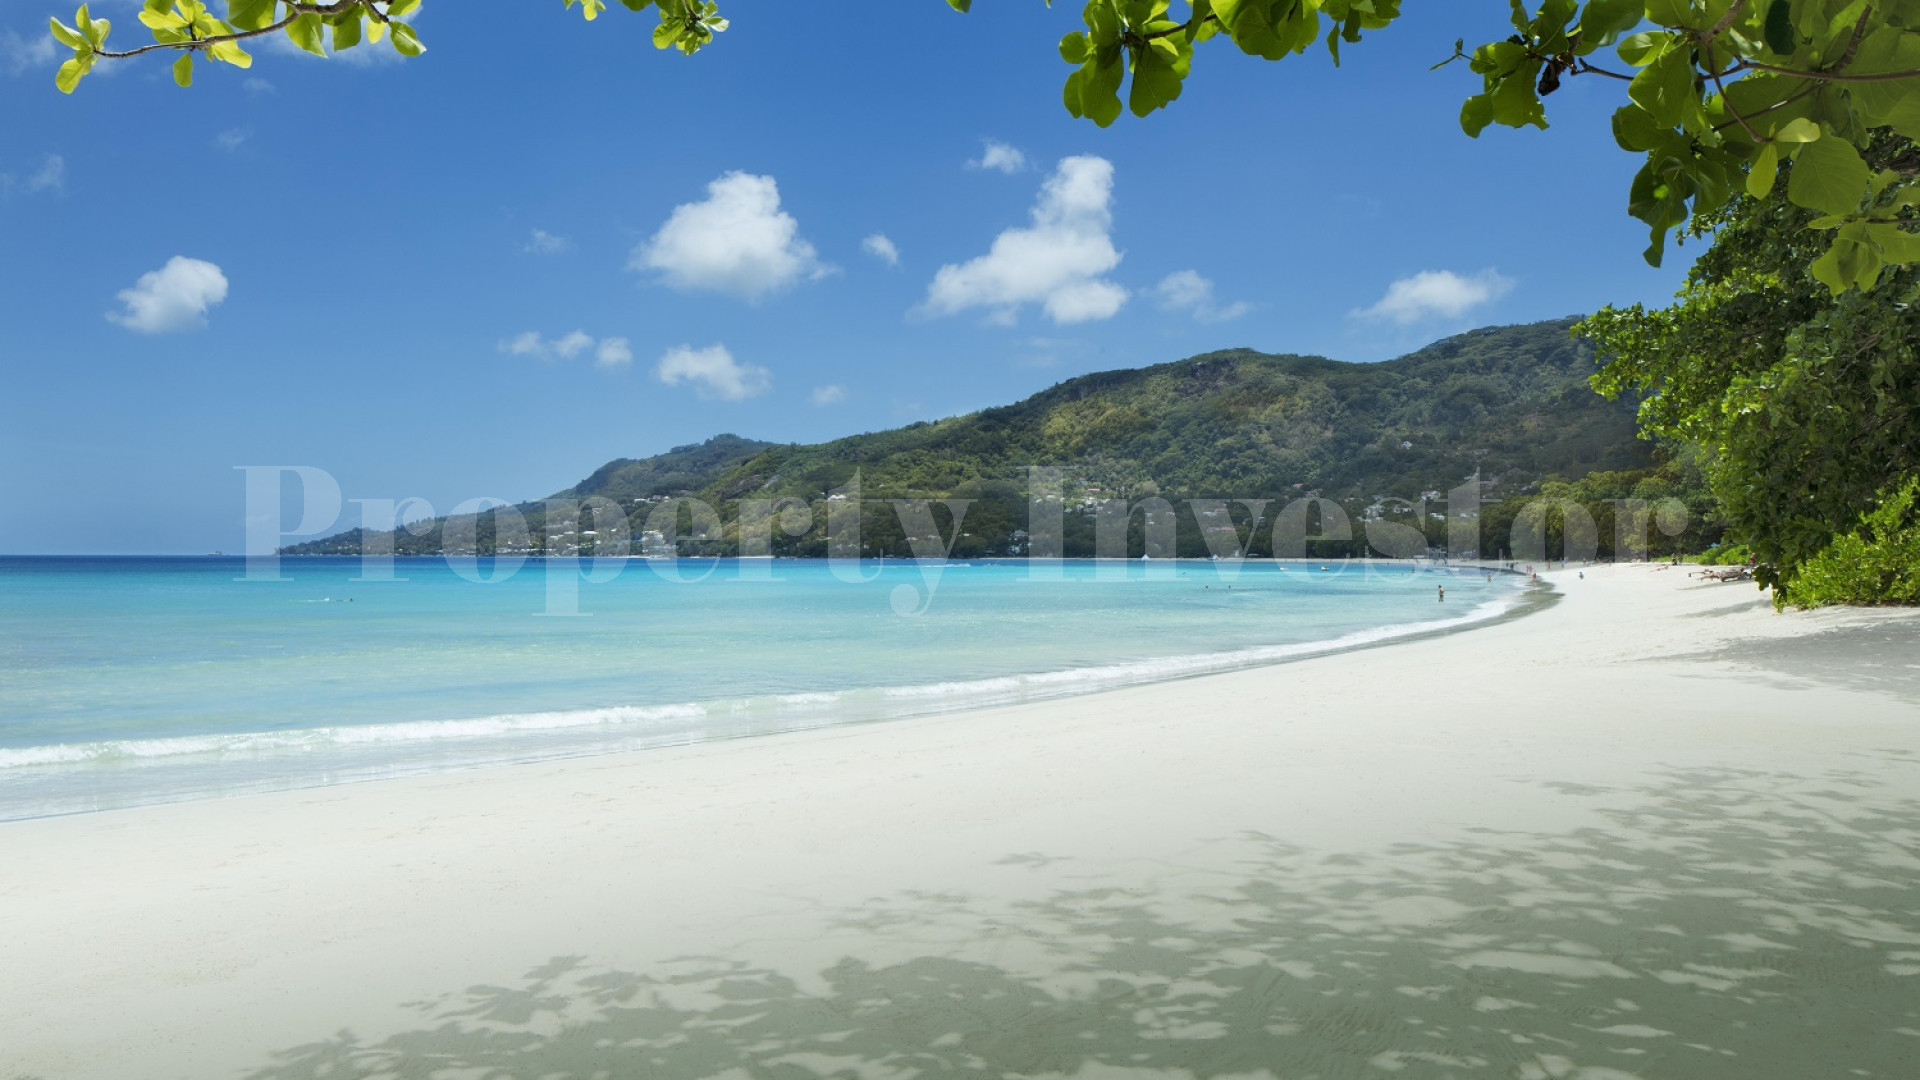 Spectacular 0.16 Hectare Panoramic Sea View Lot Near Beau Vallon Beach in Seychelles